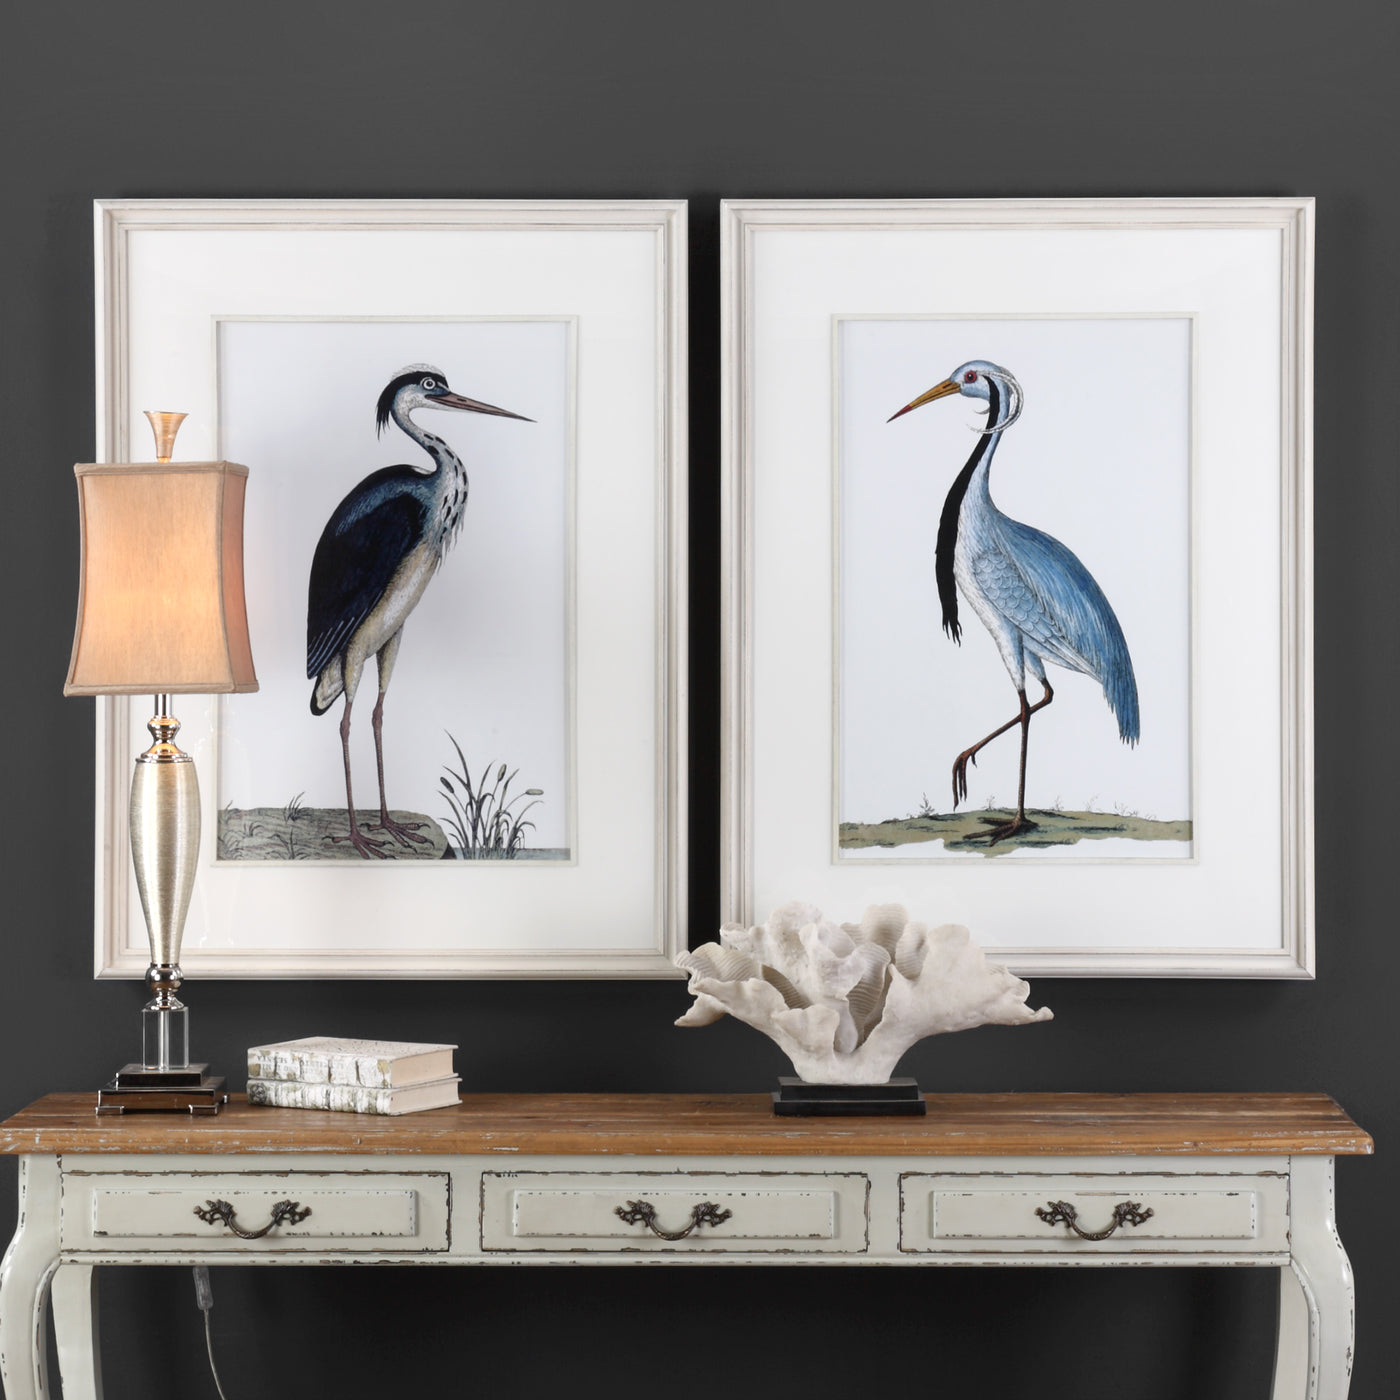 Add A Dash Of Wayfaring Style To A Design With This Coastal Artwork. Adding A Light And Airy Feel To A Space, Each Bird Pr...